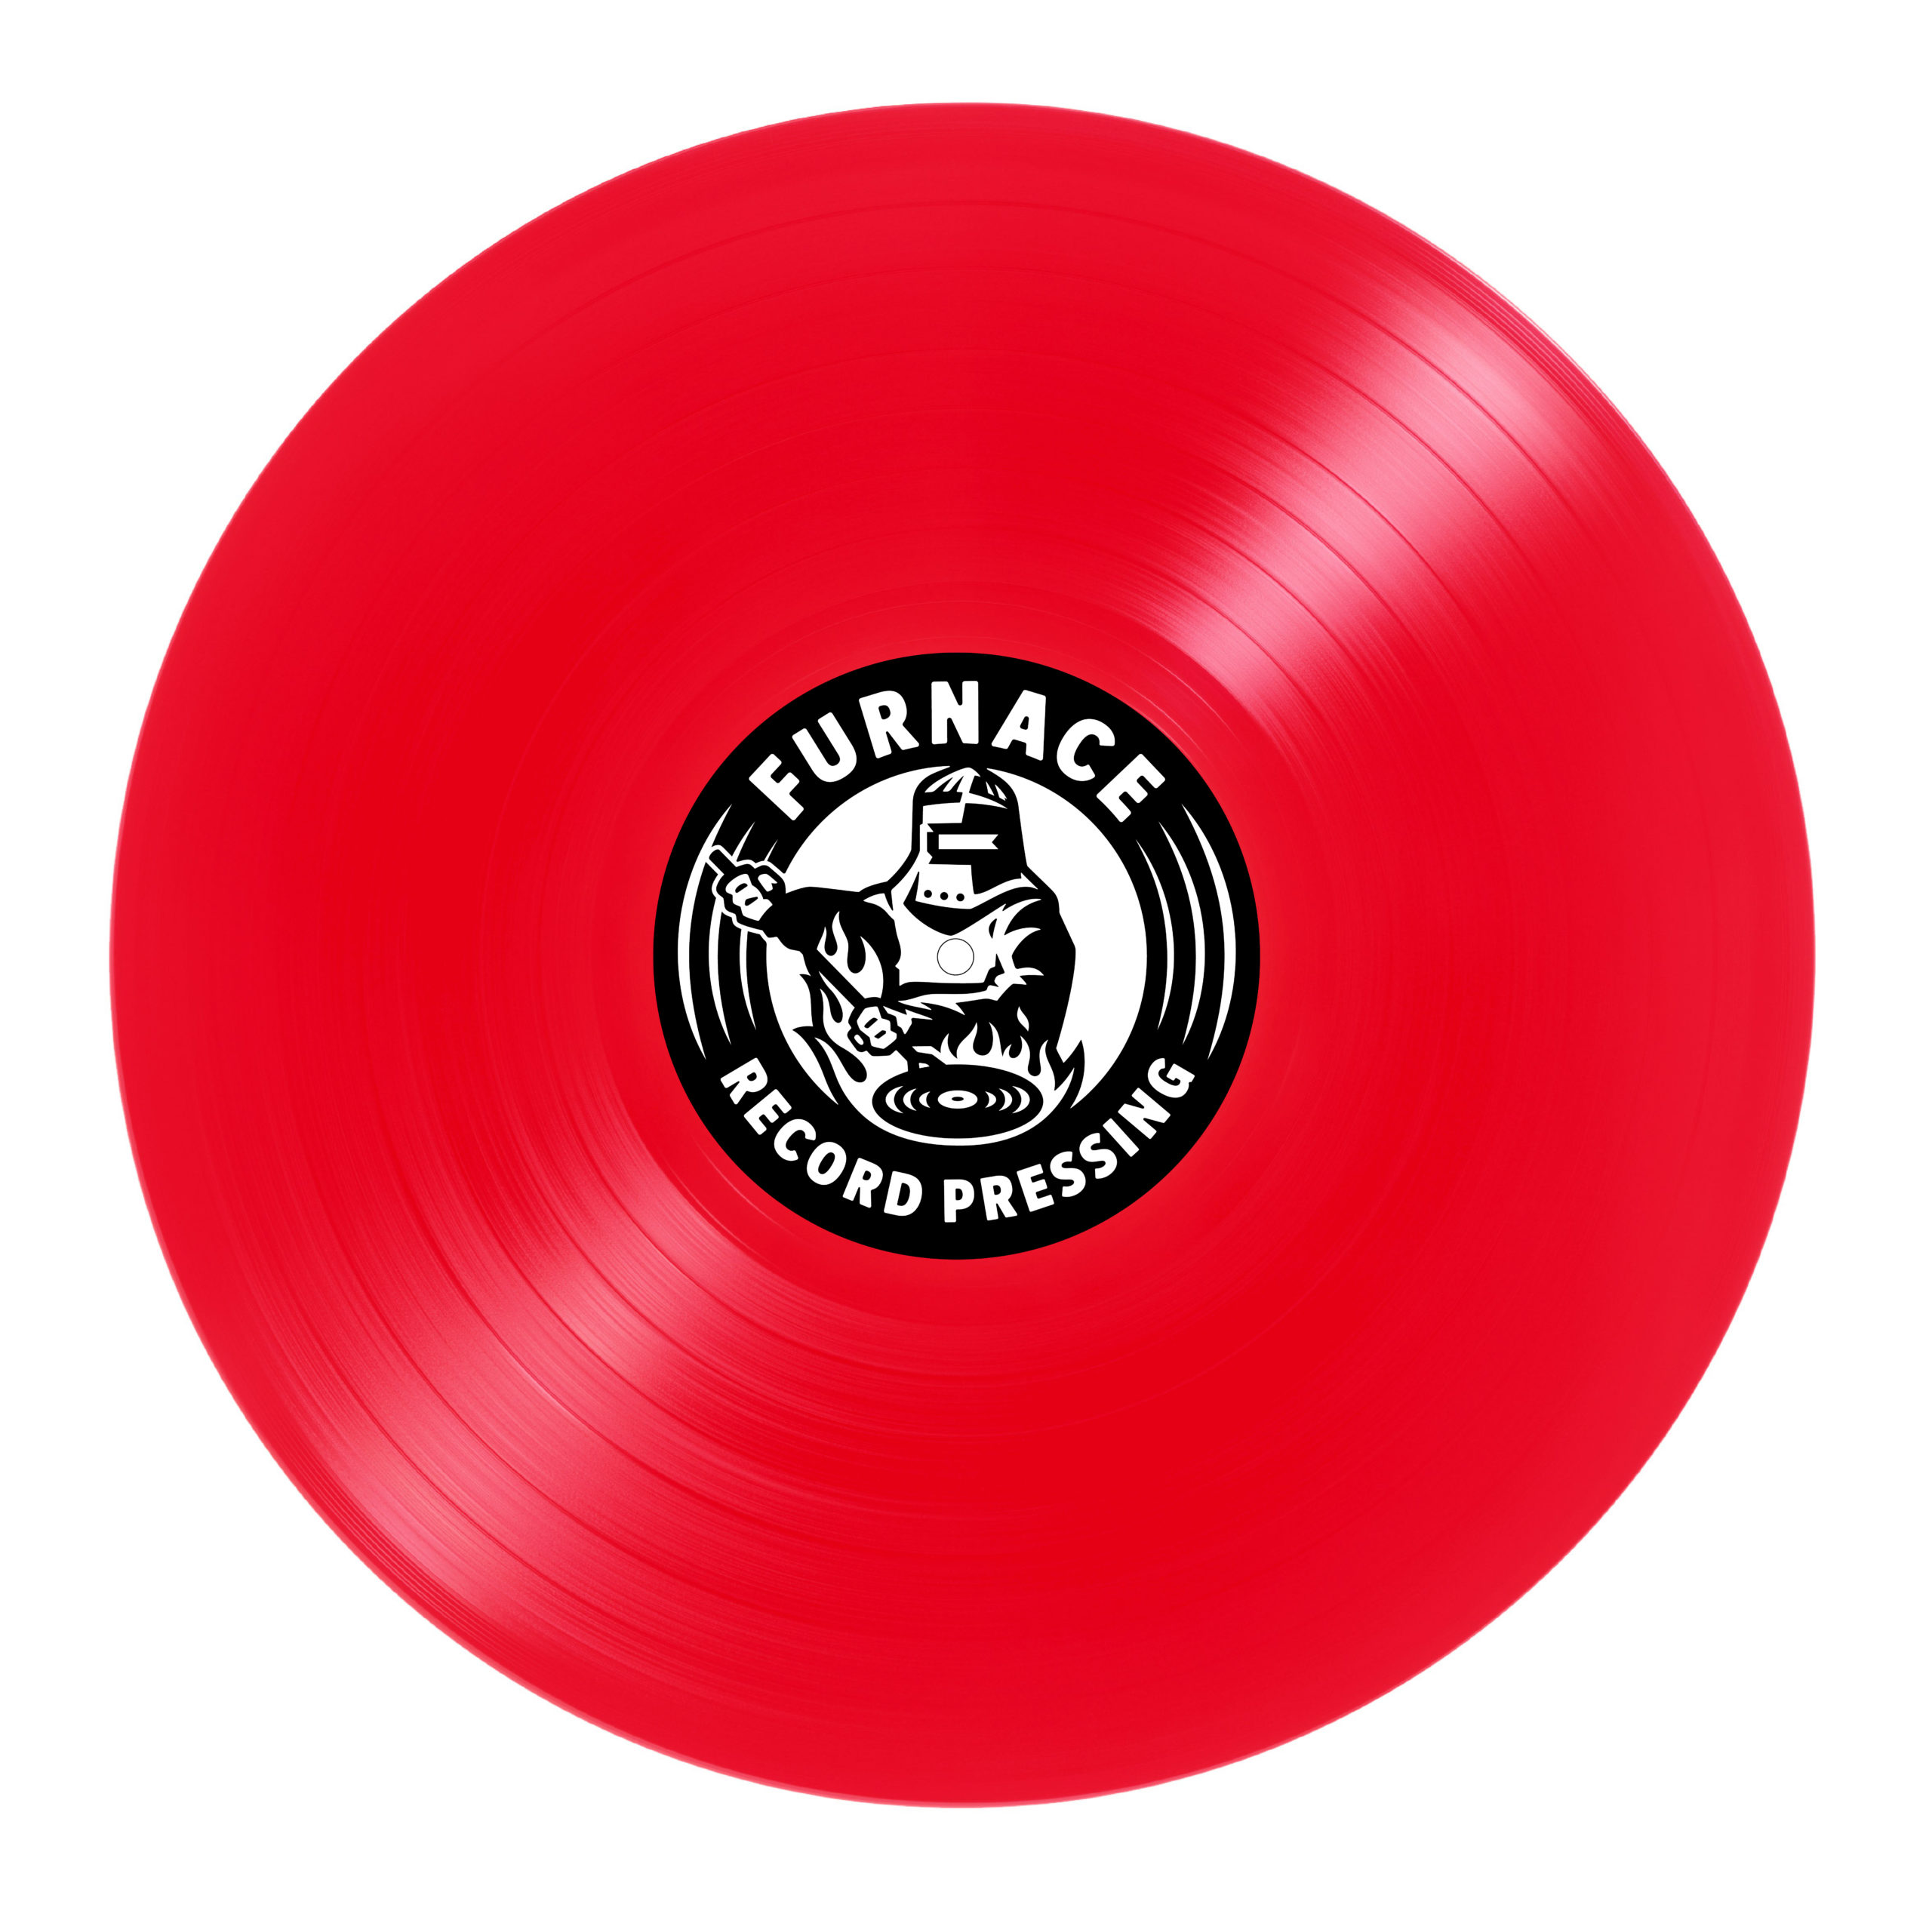 Vector 45 Vinyl Record Stock Illustration - Download Image Now